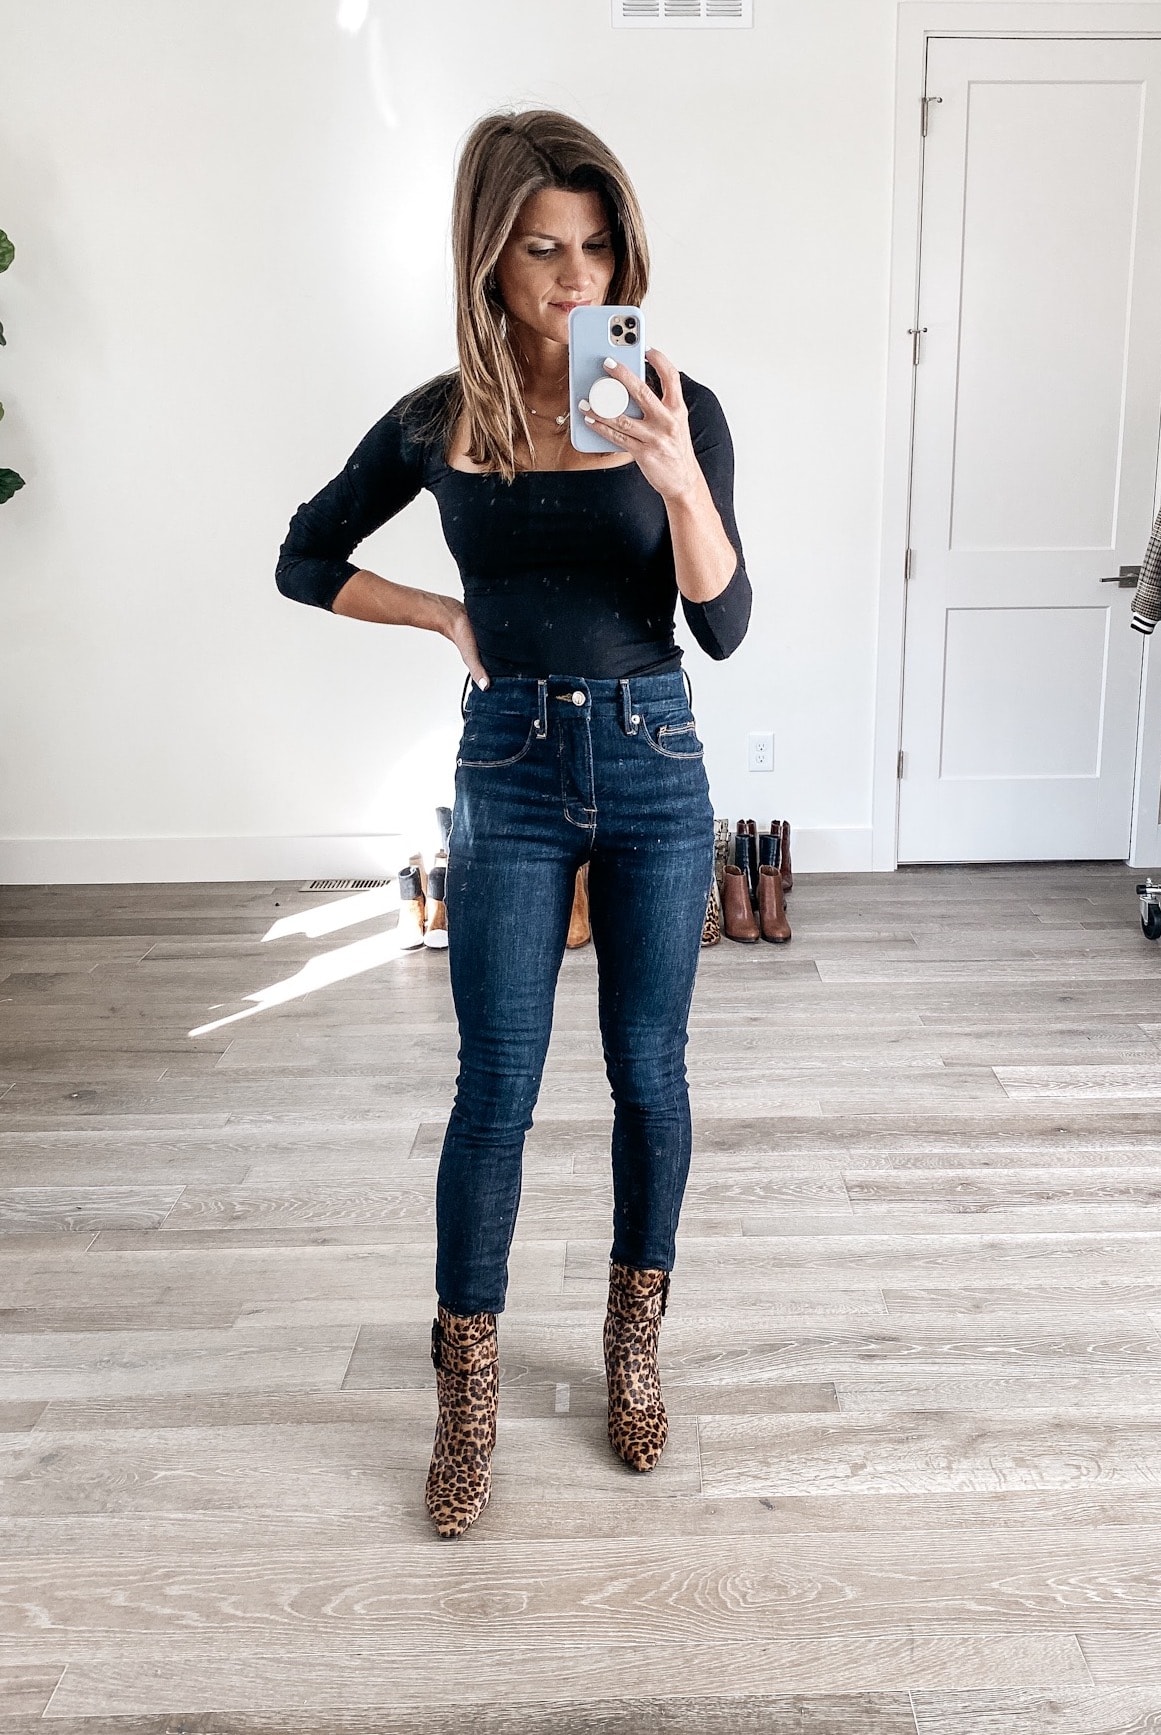 chunky black boots outfit